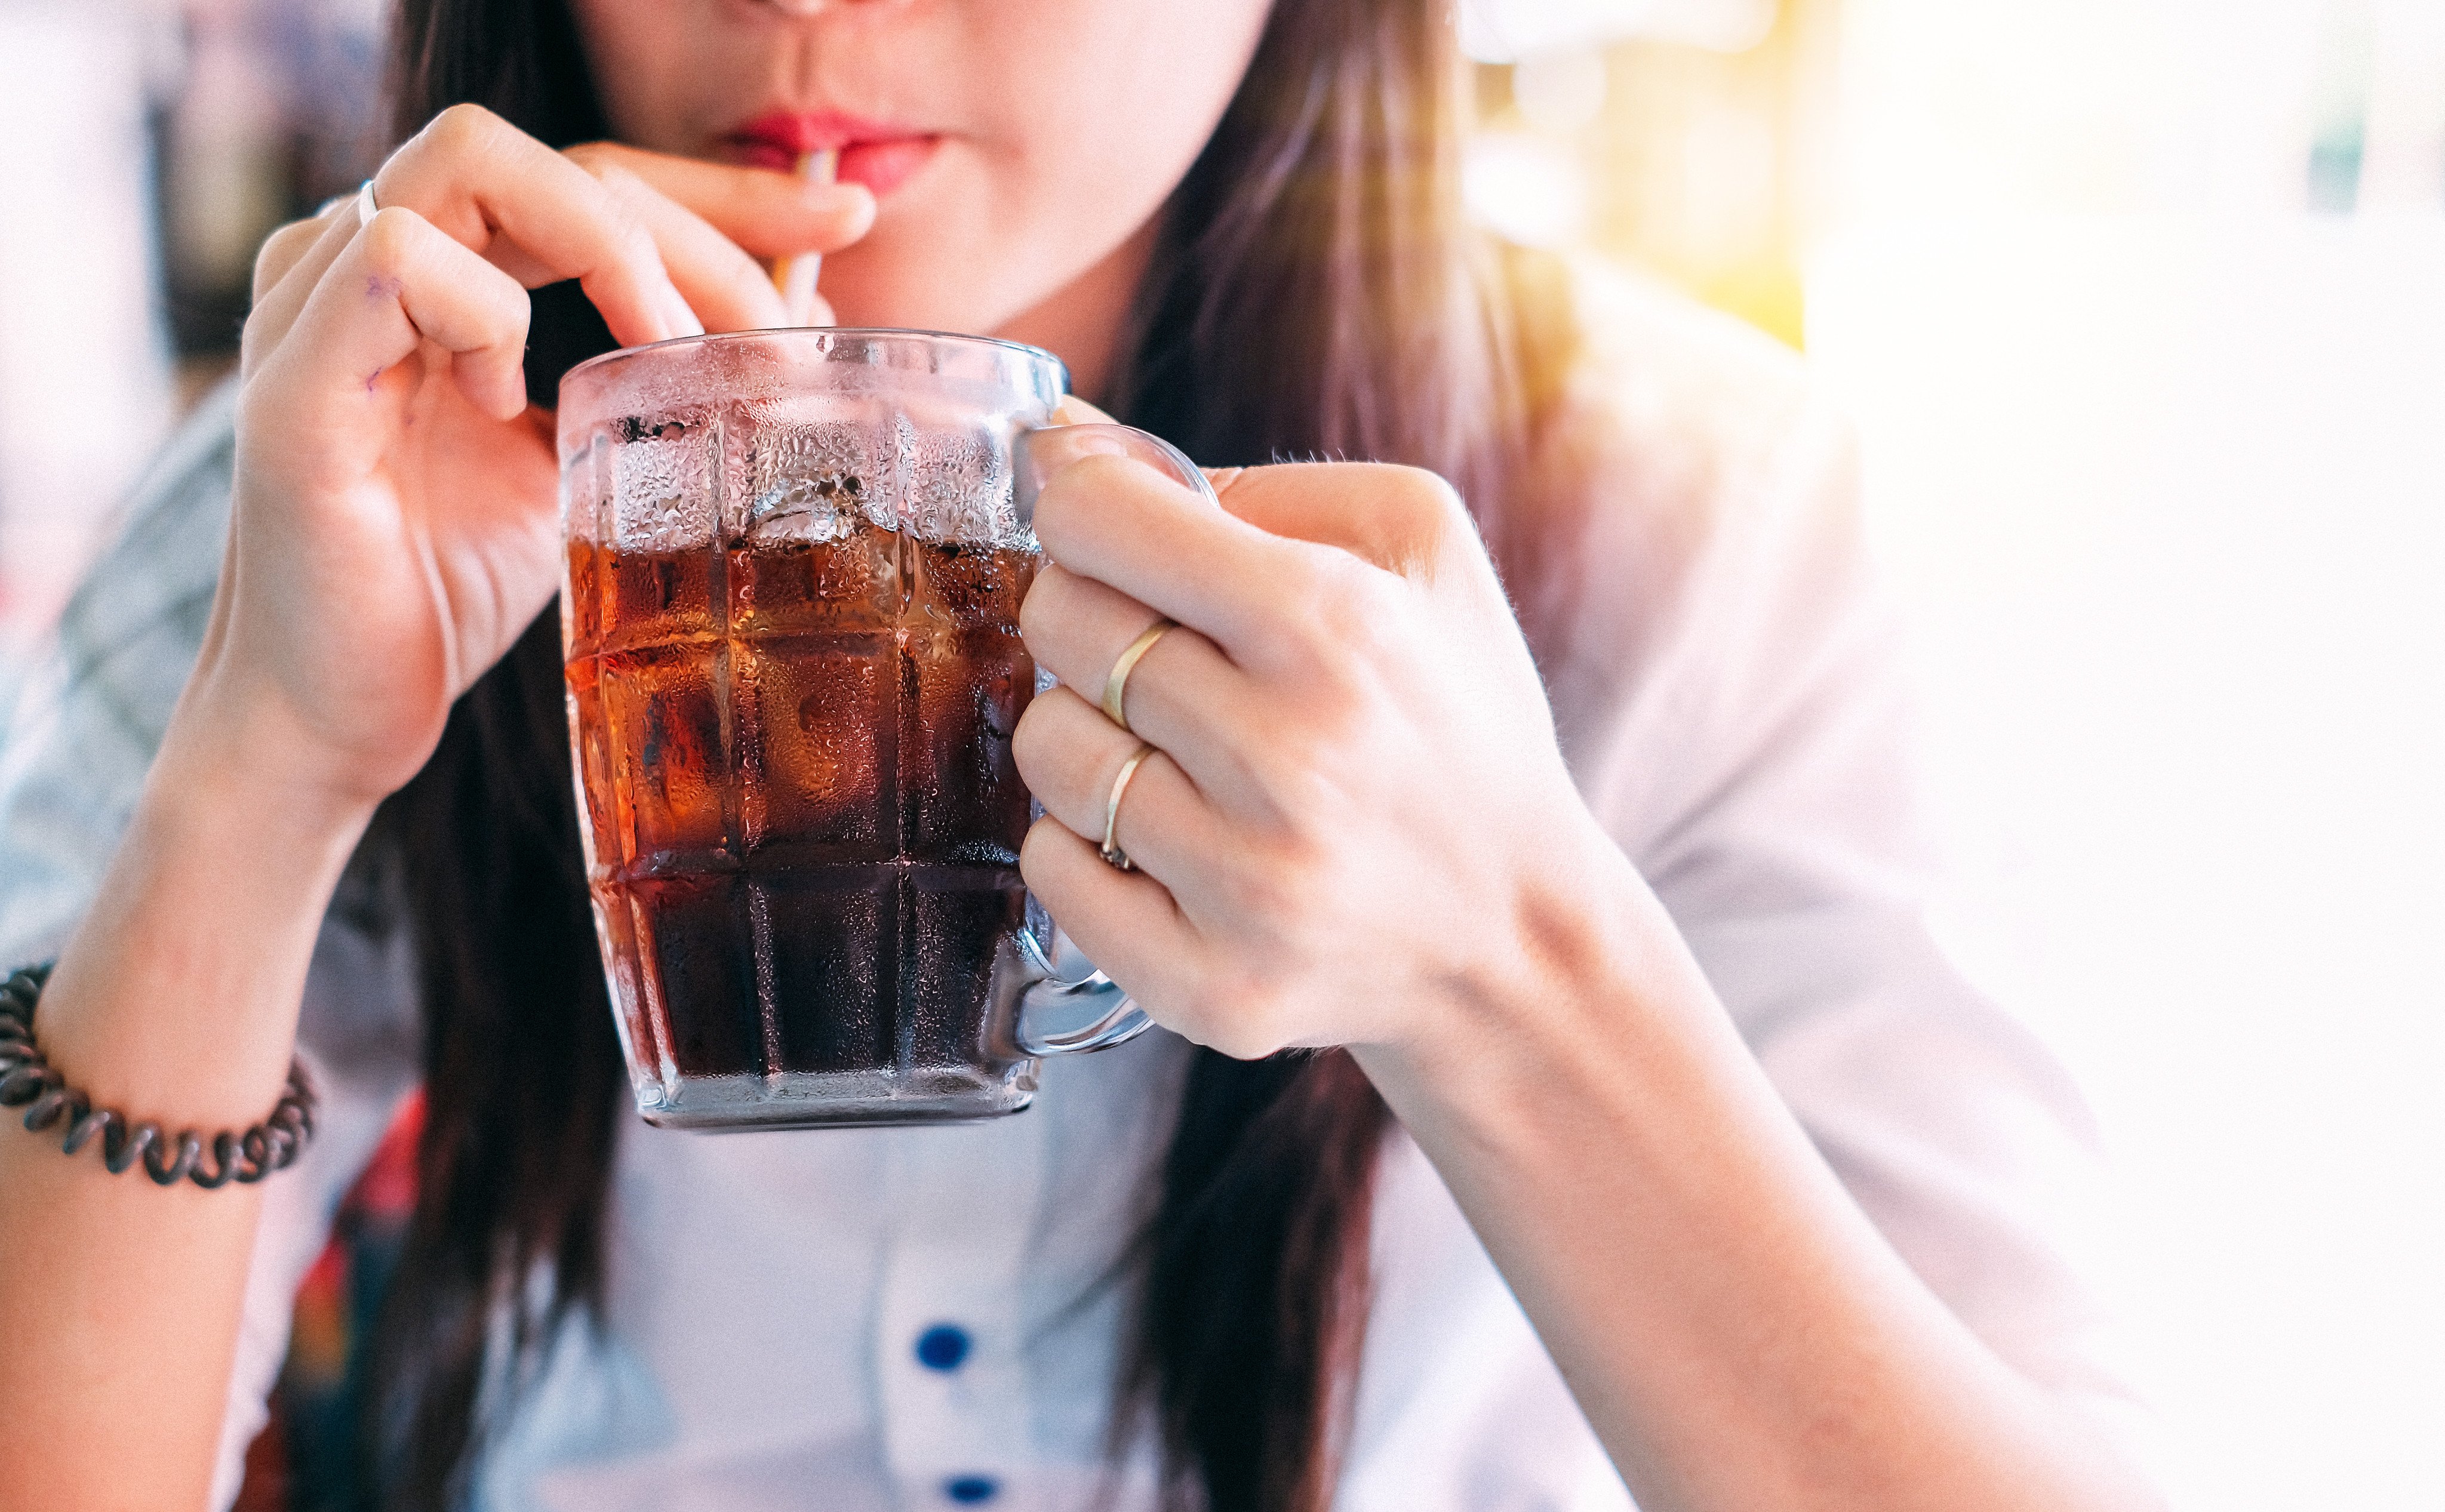 More people are adopting no-alcohol lifestyles or attempting challenges like Dry January but many bars and restaurants still offer little in the way of interesting low-ABV or zero-proof beverages, often resorting to just the usual soft drinks like coke. Photo: Shutterstock